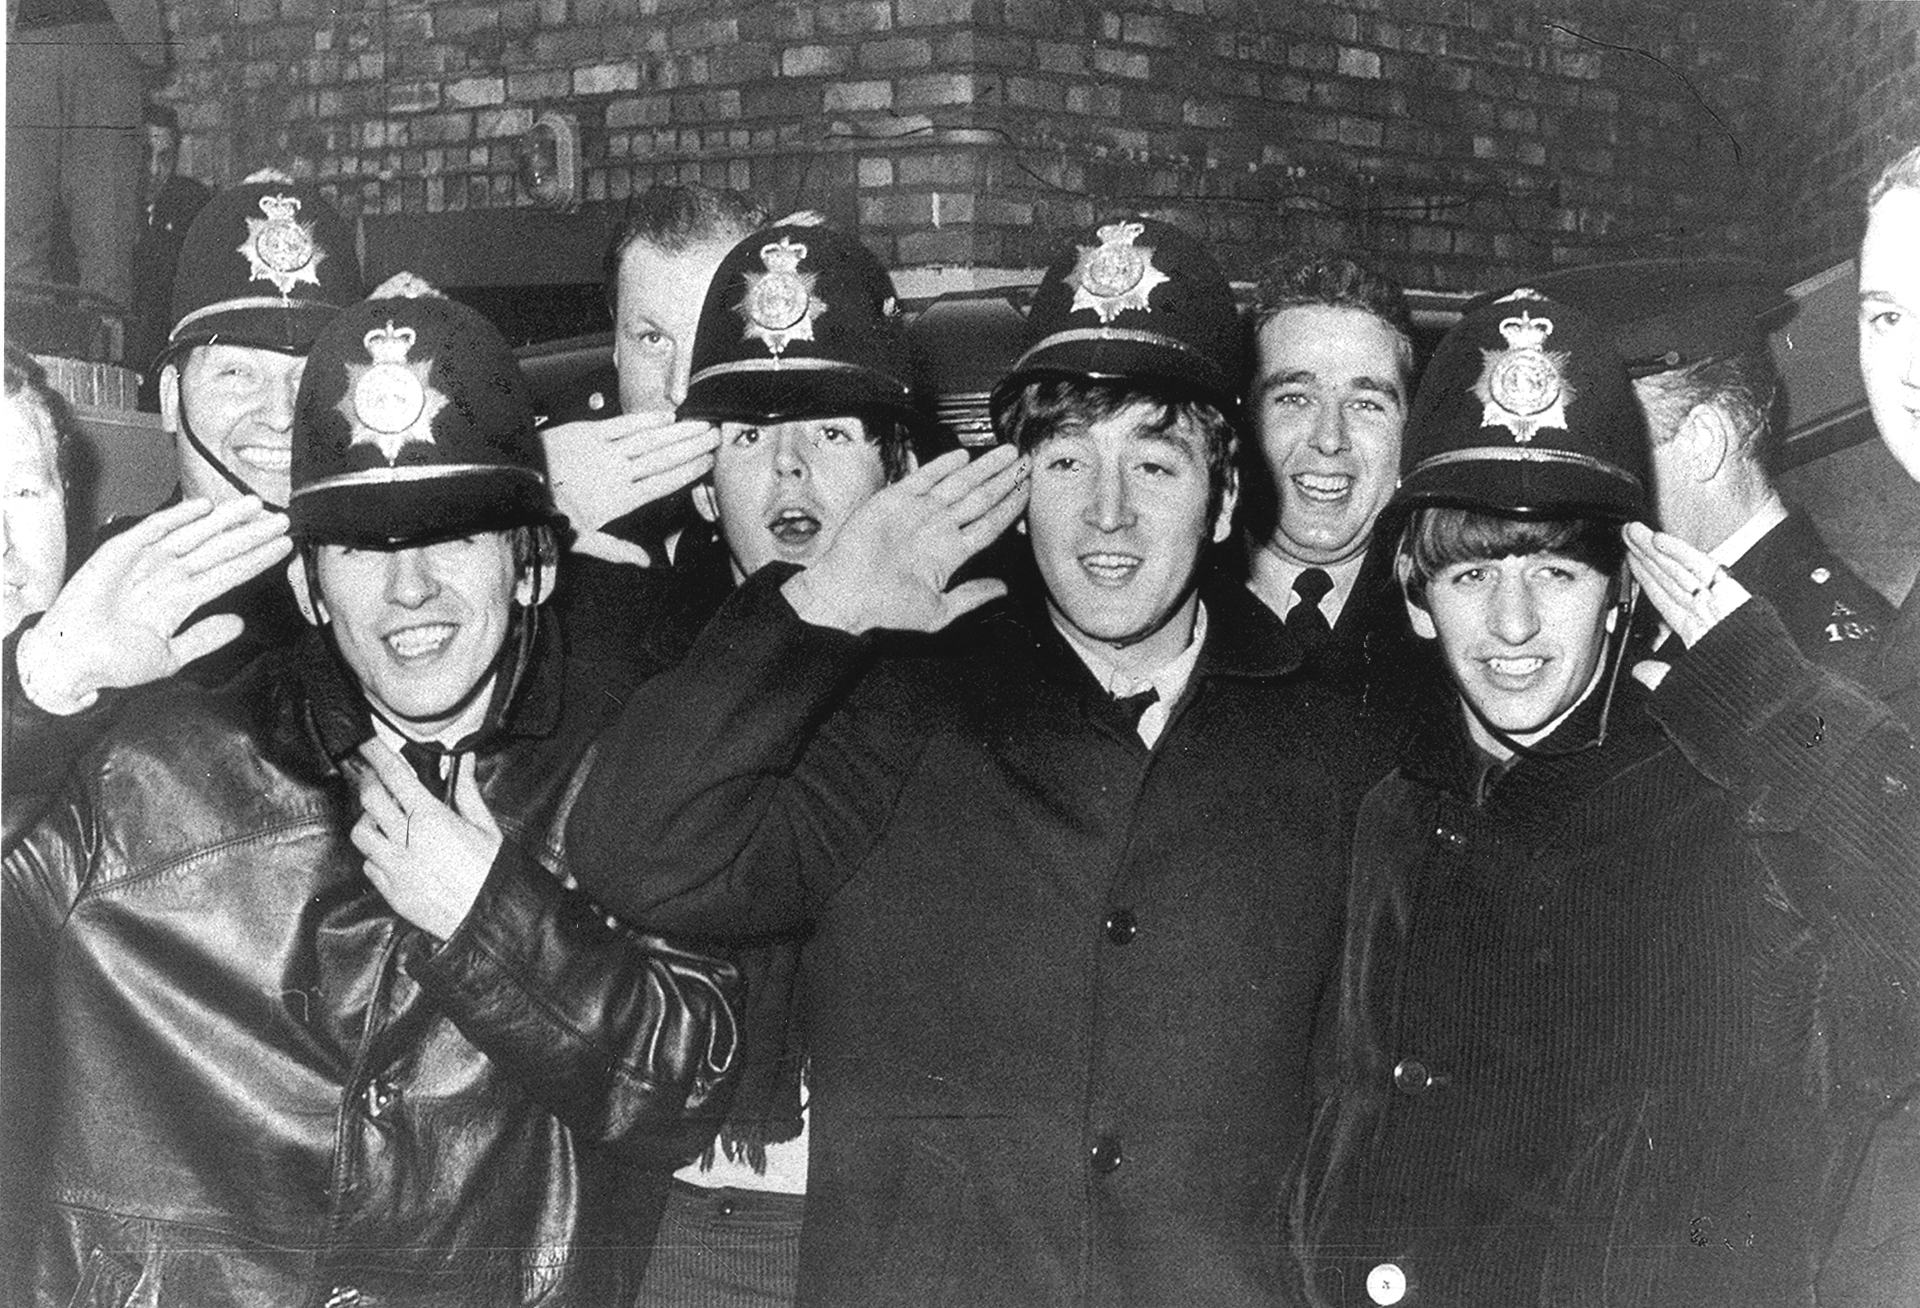 The Beatles outside the Birmingham Hippodrome, November 1963. Due to the size of the crowds, they had to be smuggled into the venue with assistance from local police.